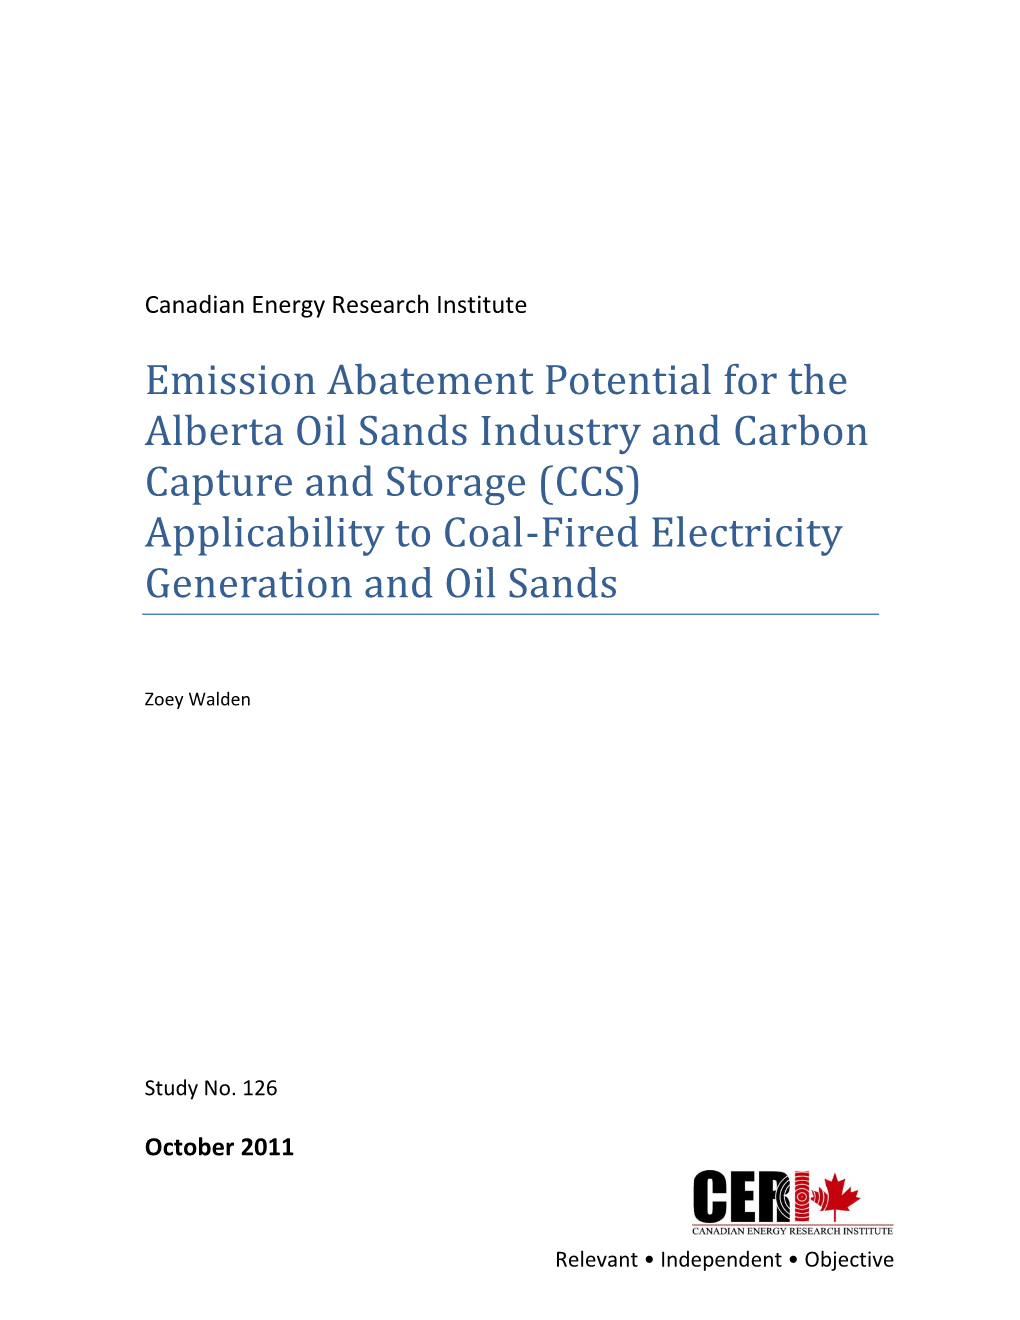 Emission Abatement Potential for the Alberta Oil Sands Industry and Carbon Capture and Storage (CCS) Applicability to Coal-Fired Electricity Generation and Oil Sands